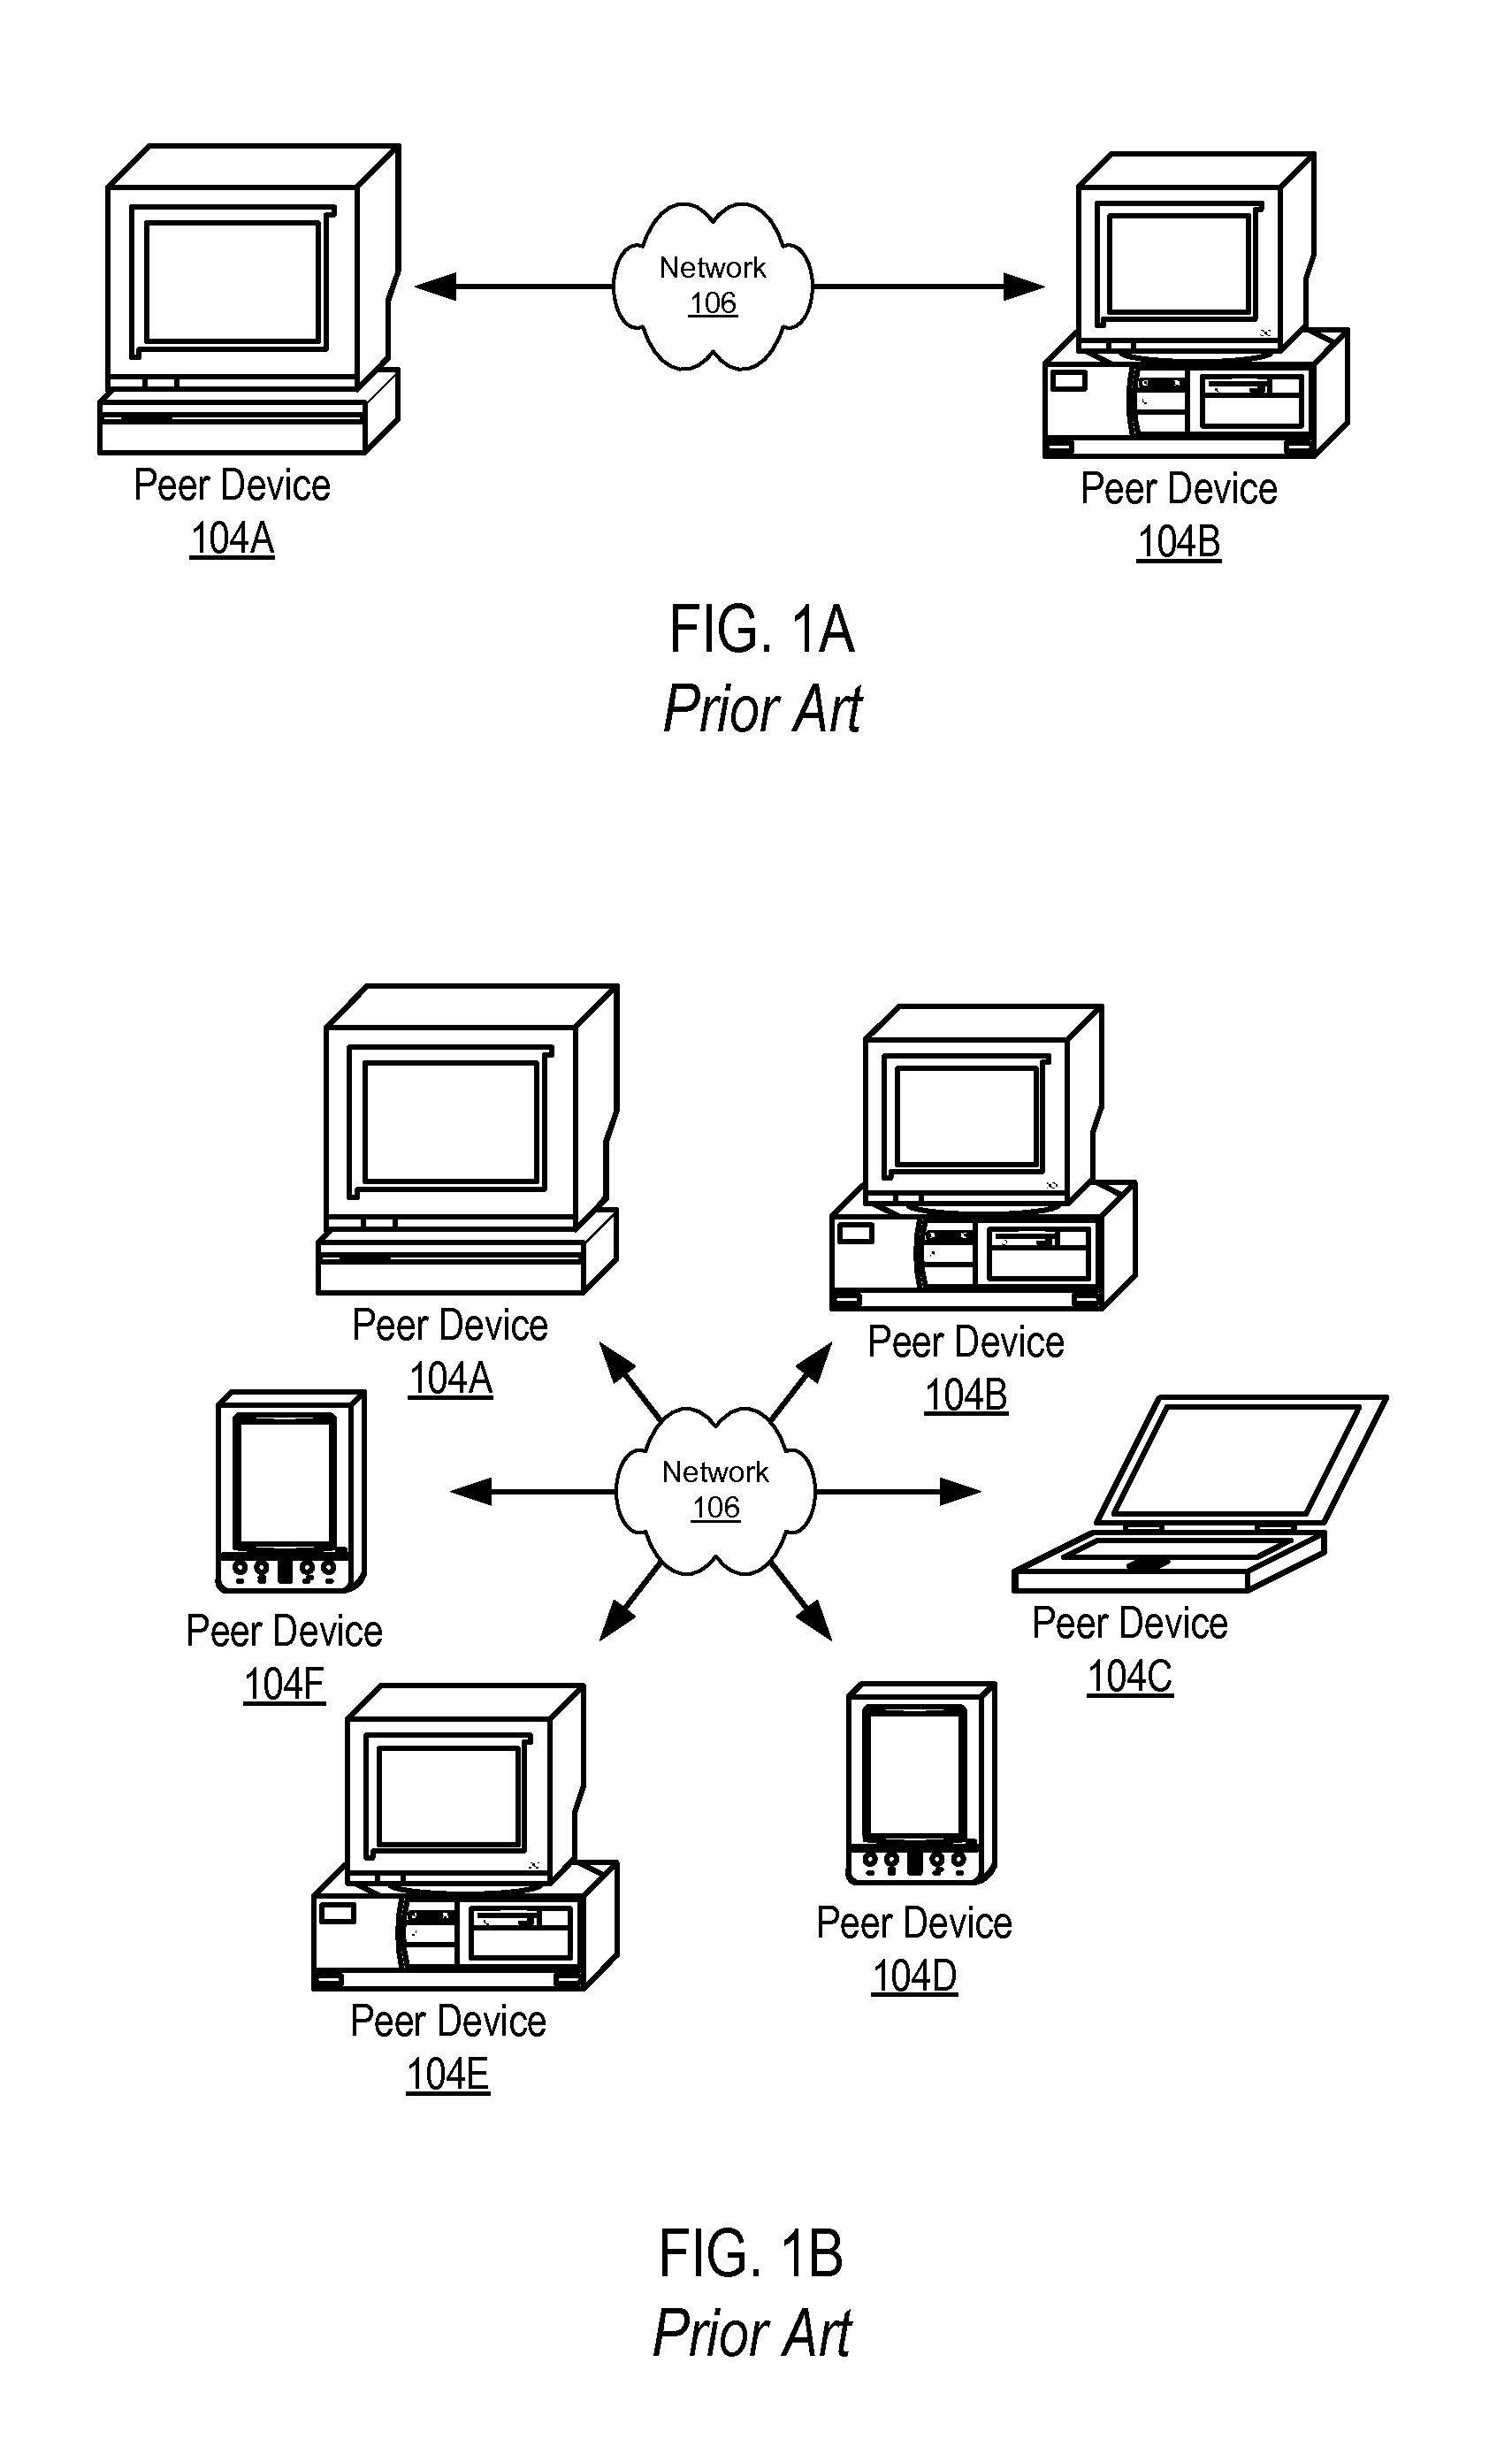 Method and apparatus for decentralized device and service description and discovery